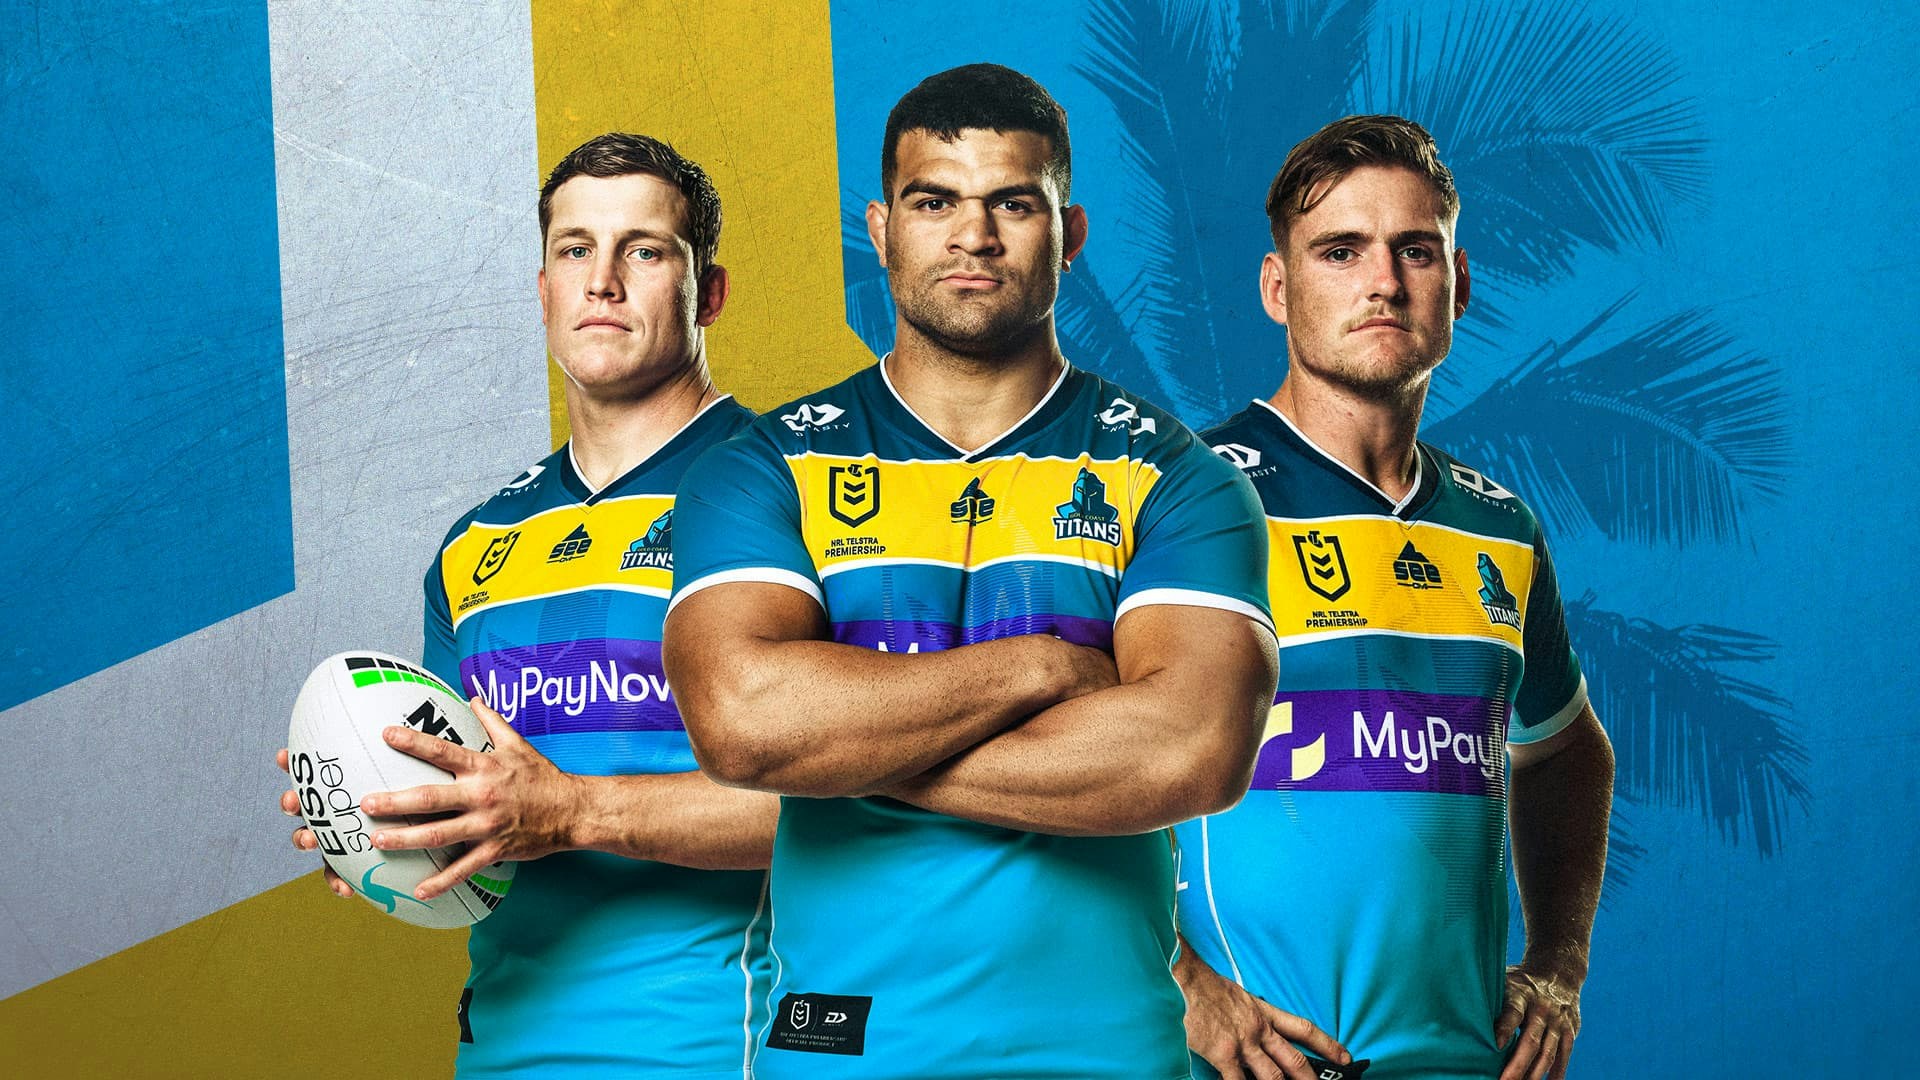 Gold Coast Titans showing the new brand